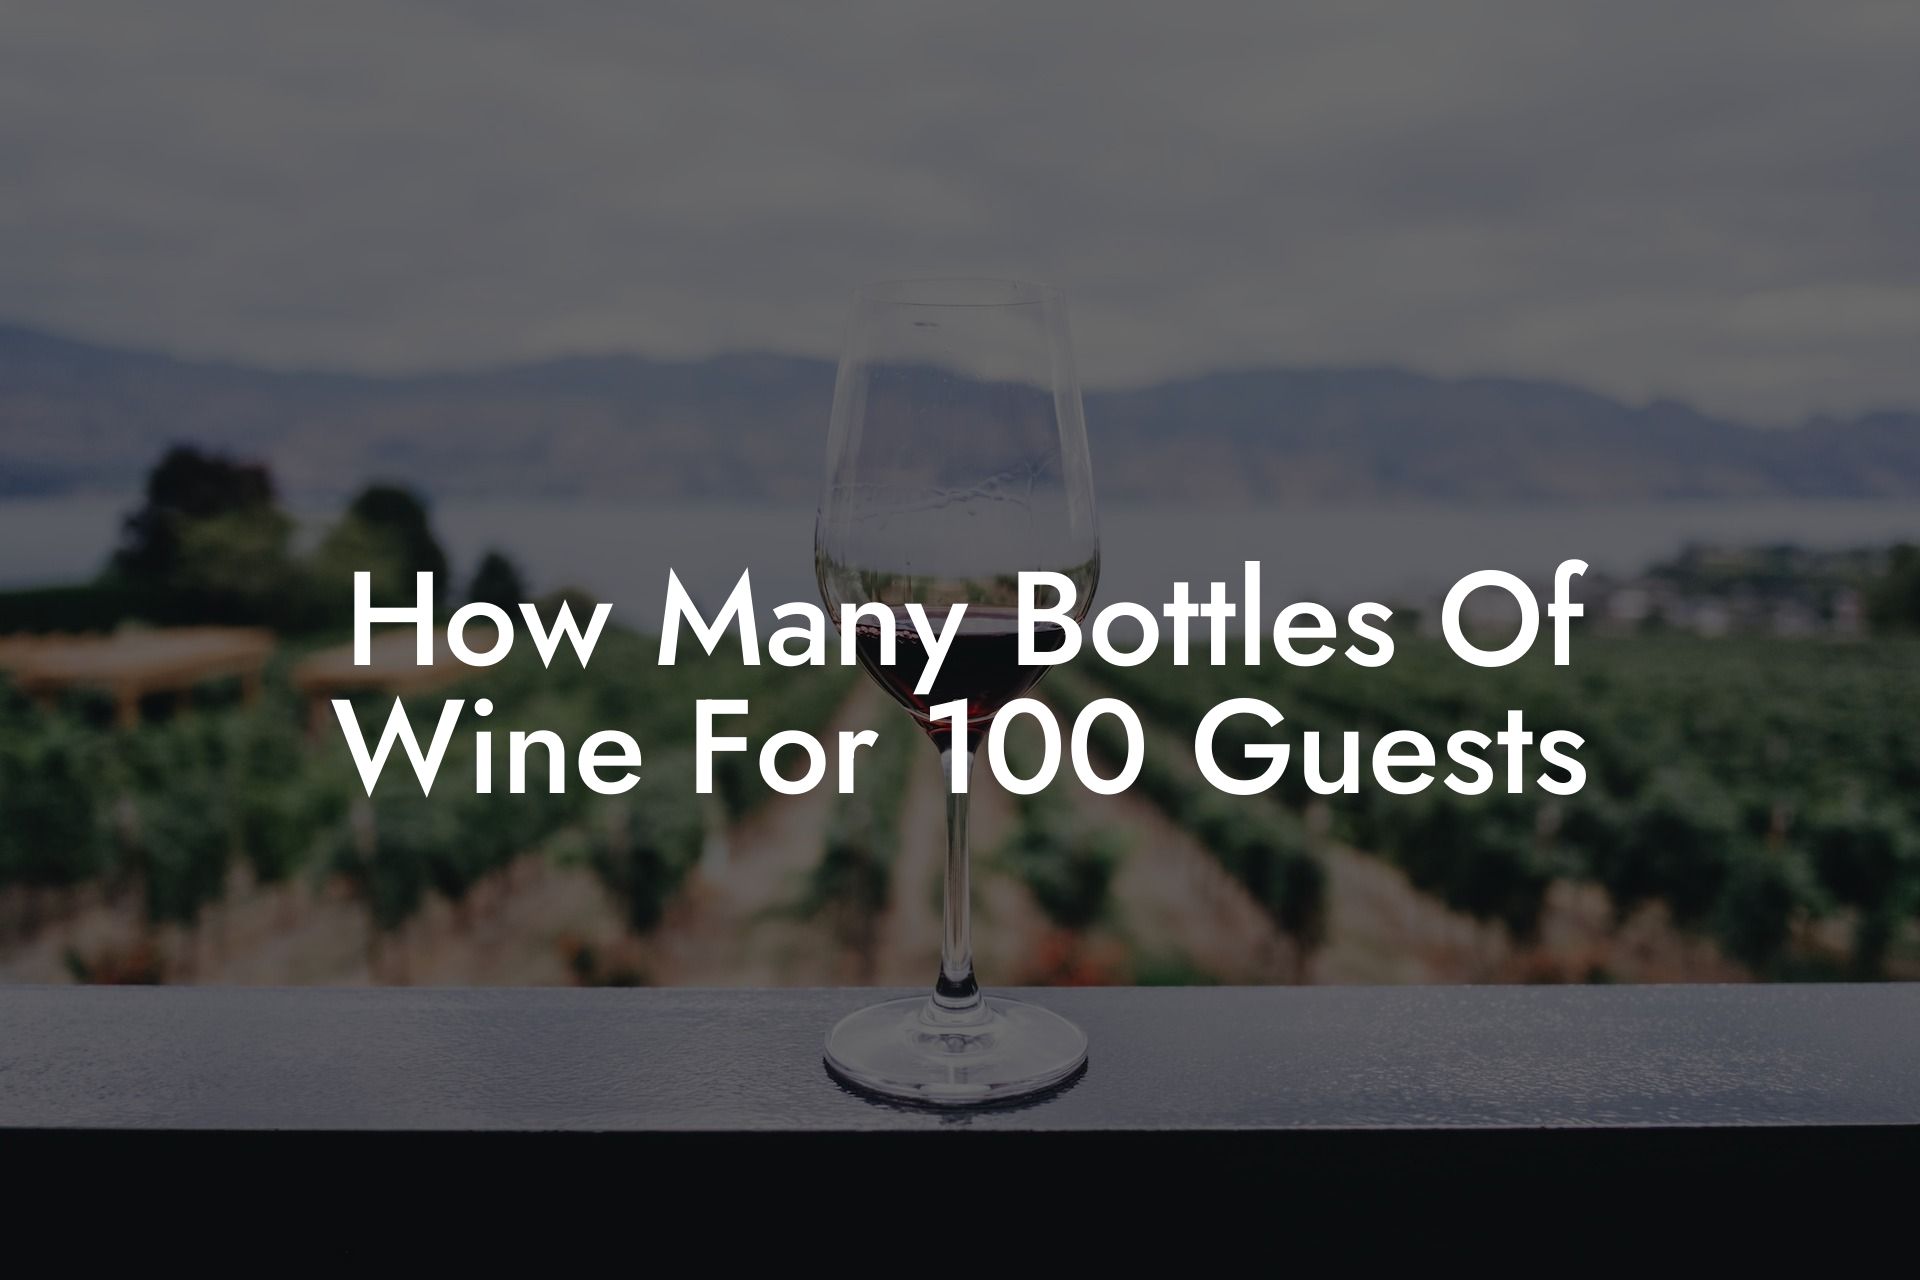 How Many Bottles Of Wine For 100 Guests